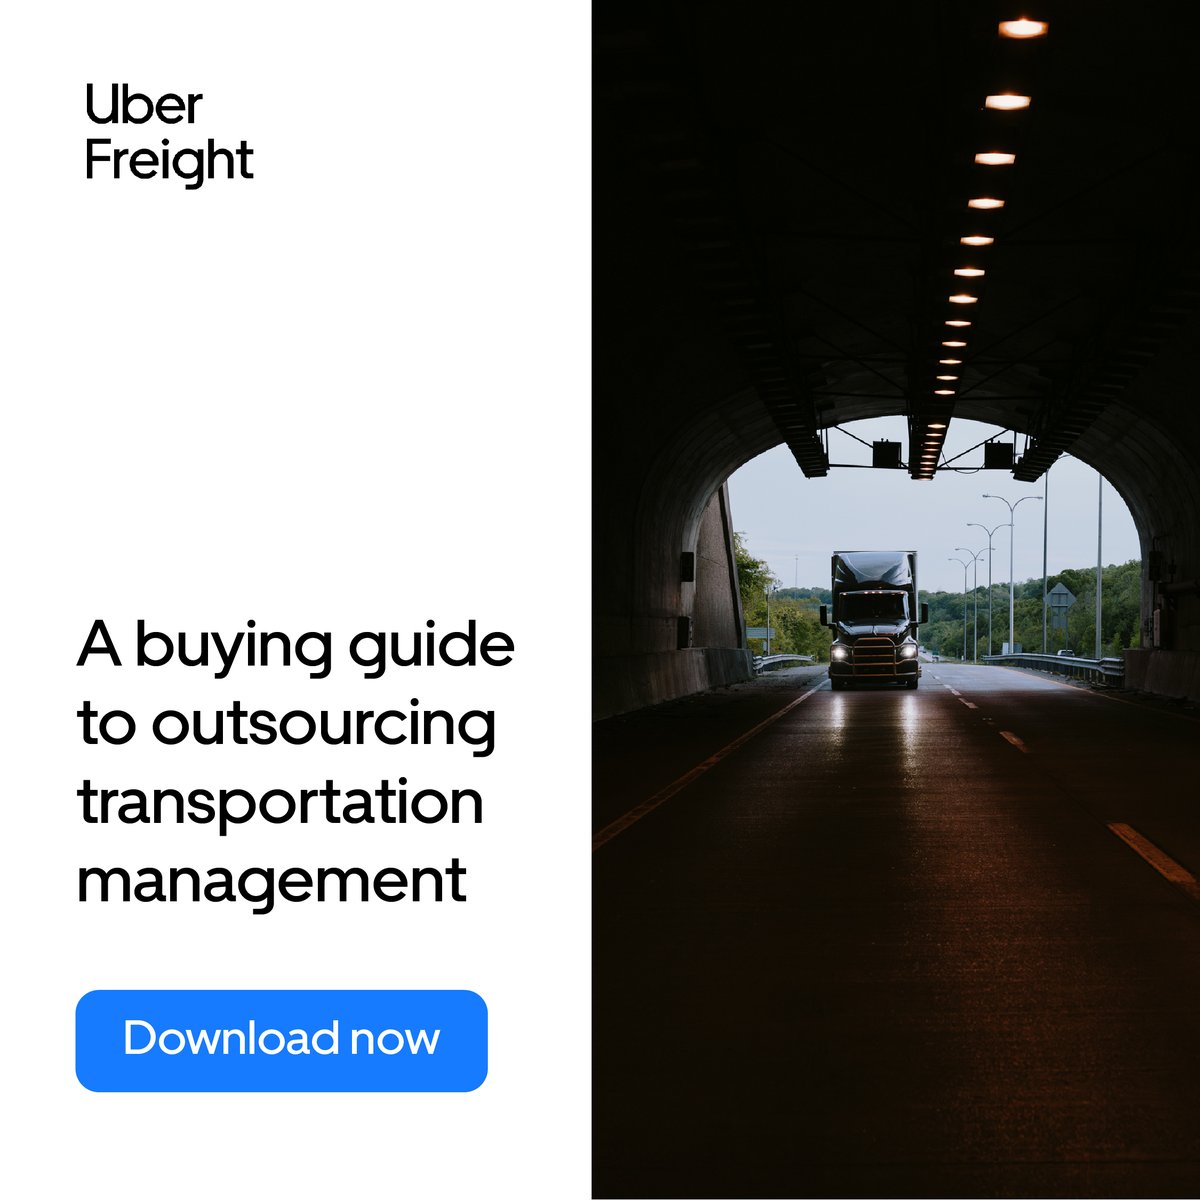 Raise your hand if you’re outsourcing #logistics services 🖐 Our transportation buying guide details everything shippers need to know about investing in these solutions. Download it today: insights.uberfreight.com/buying-guide-t…